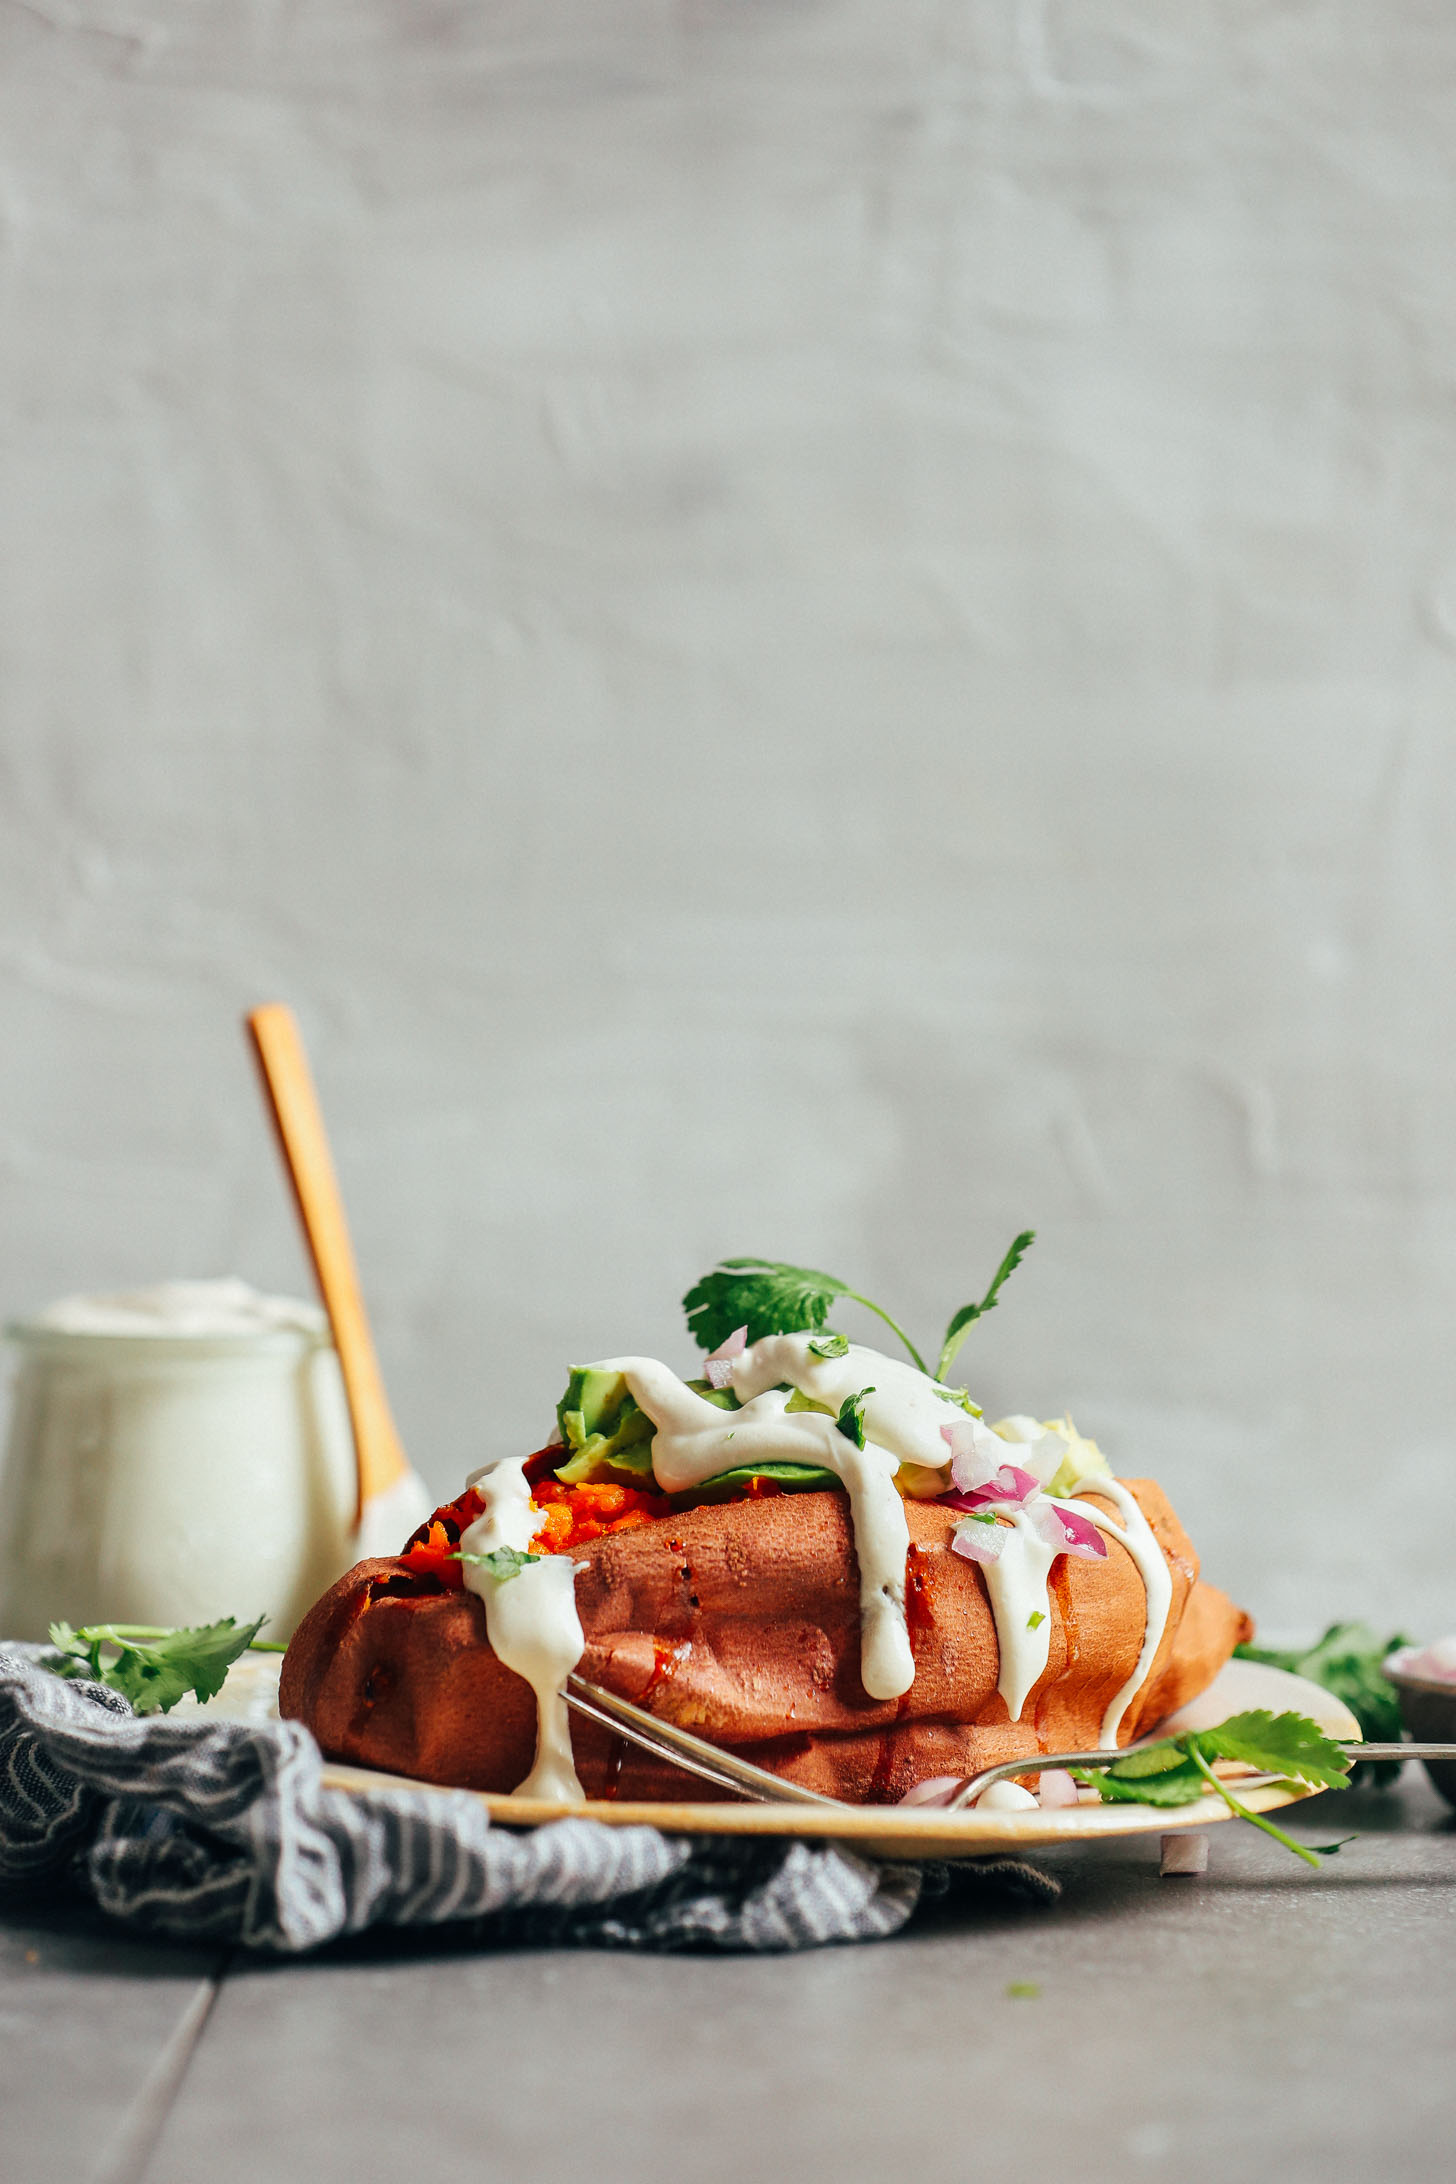 Baked sweet potato loaded with fresh vegetables and topped with homemade vegan sour cream